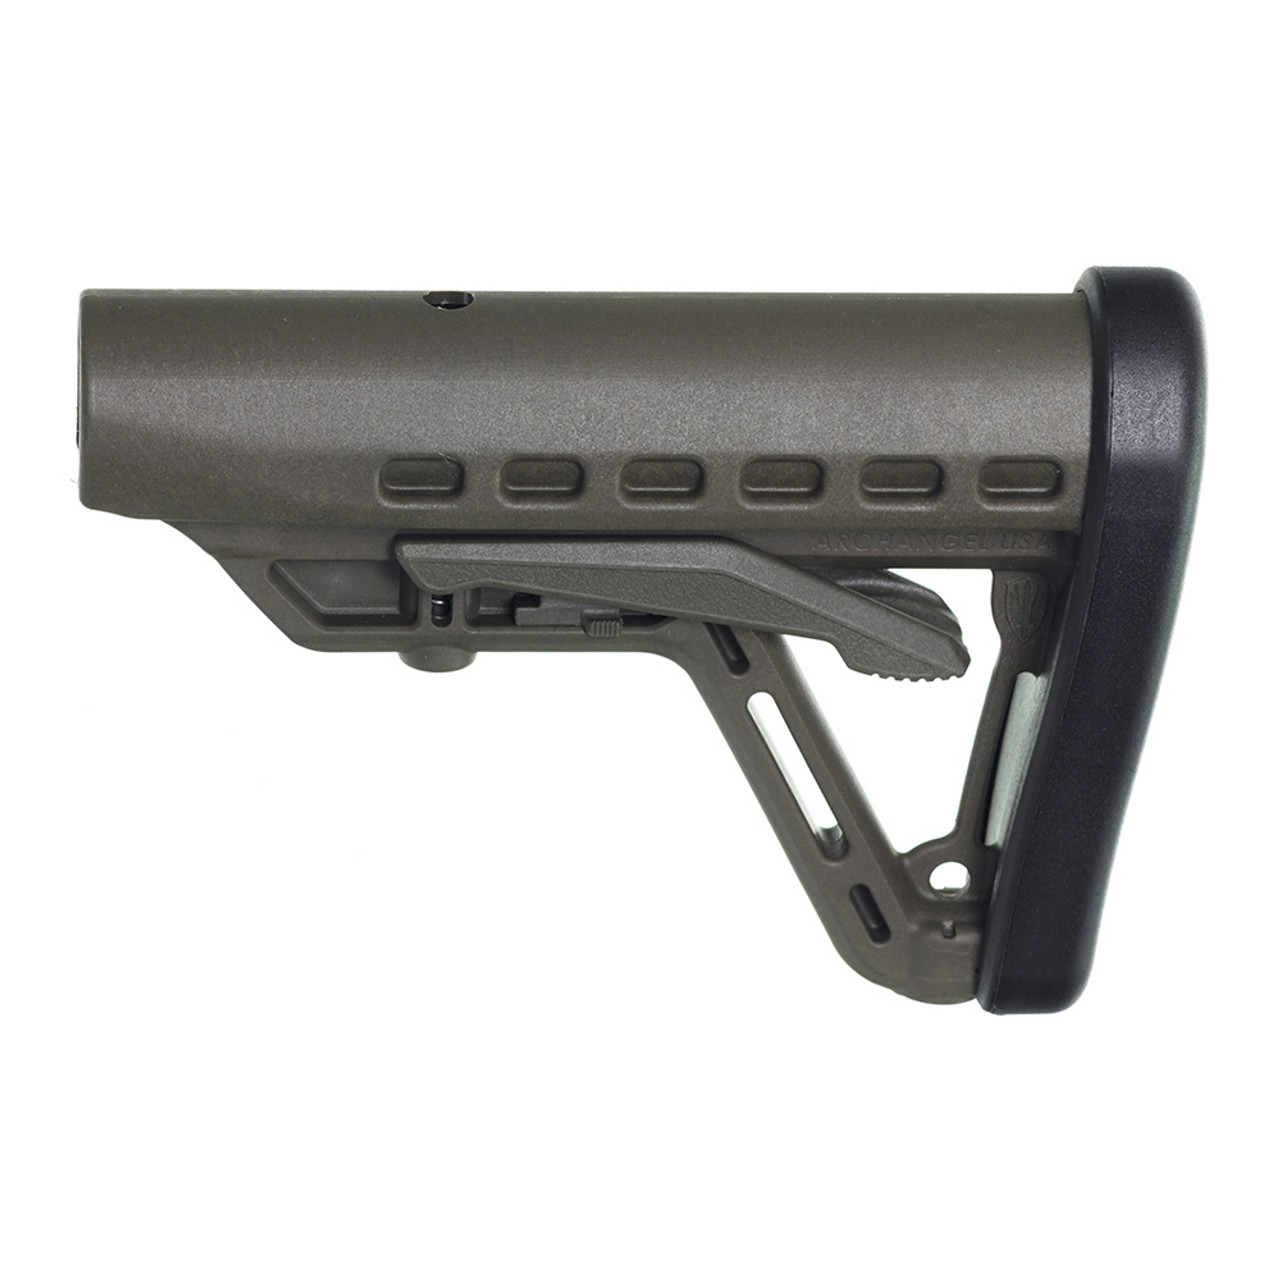 Archangel® Low-Profile AR-15® Buttstock Fits Commercial Tube - Olive Drab Polymer